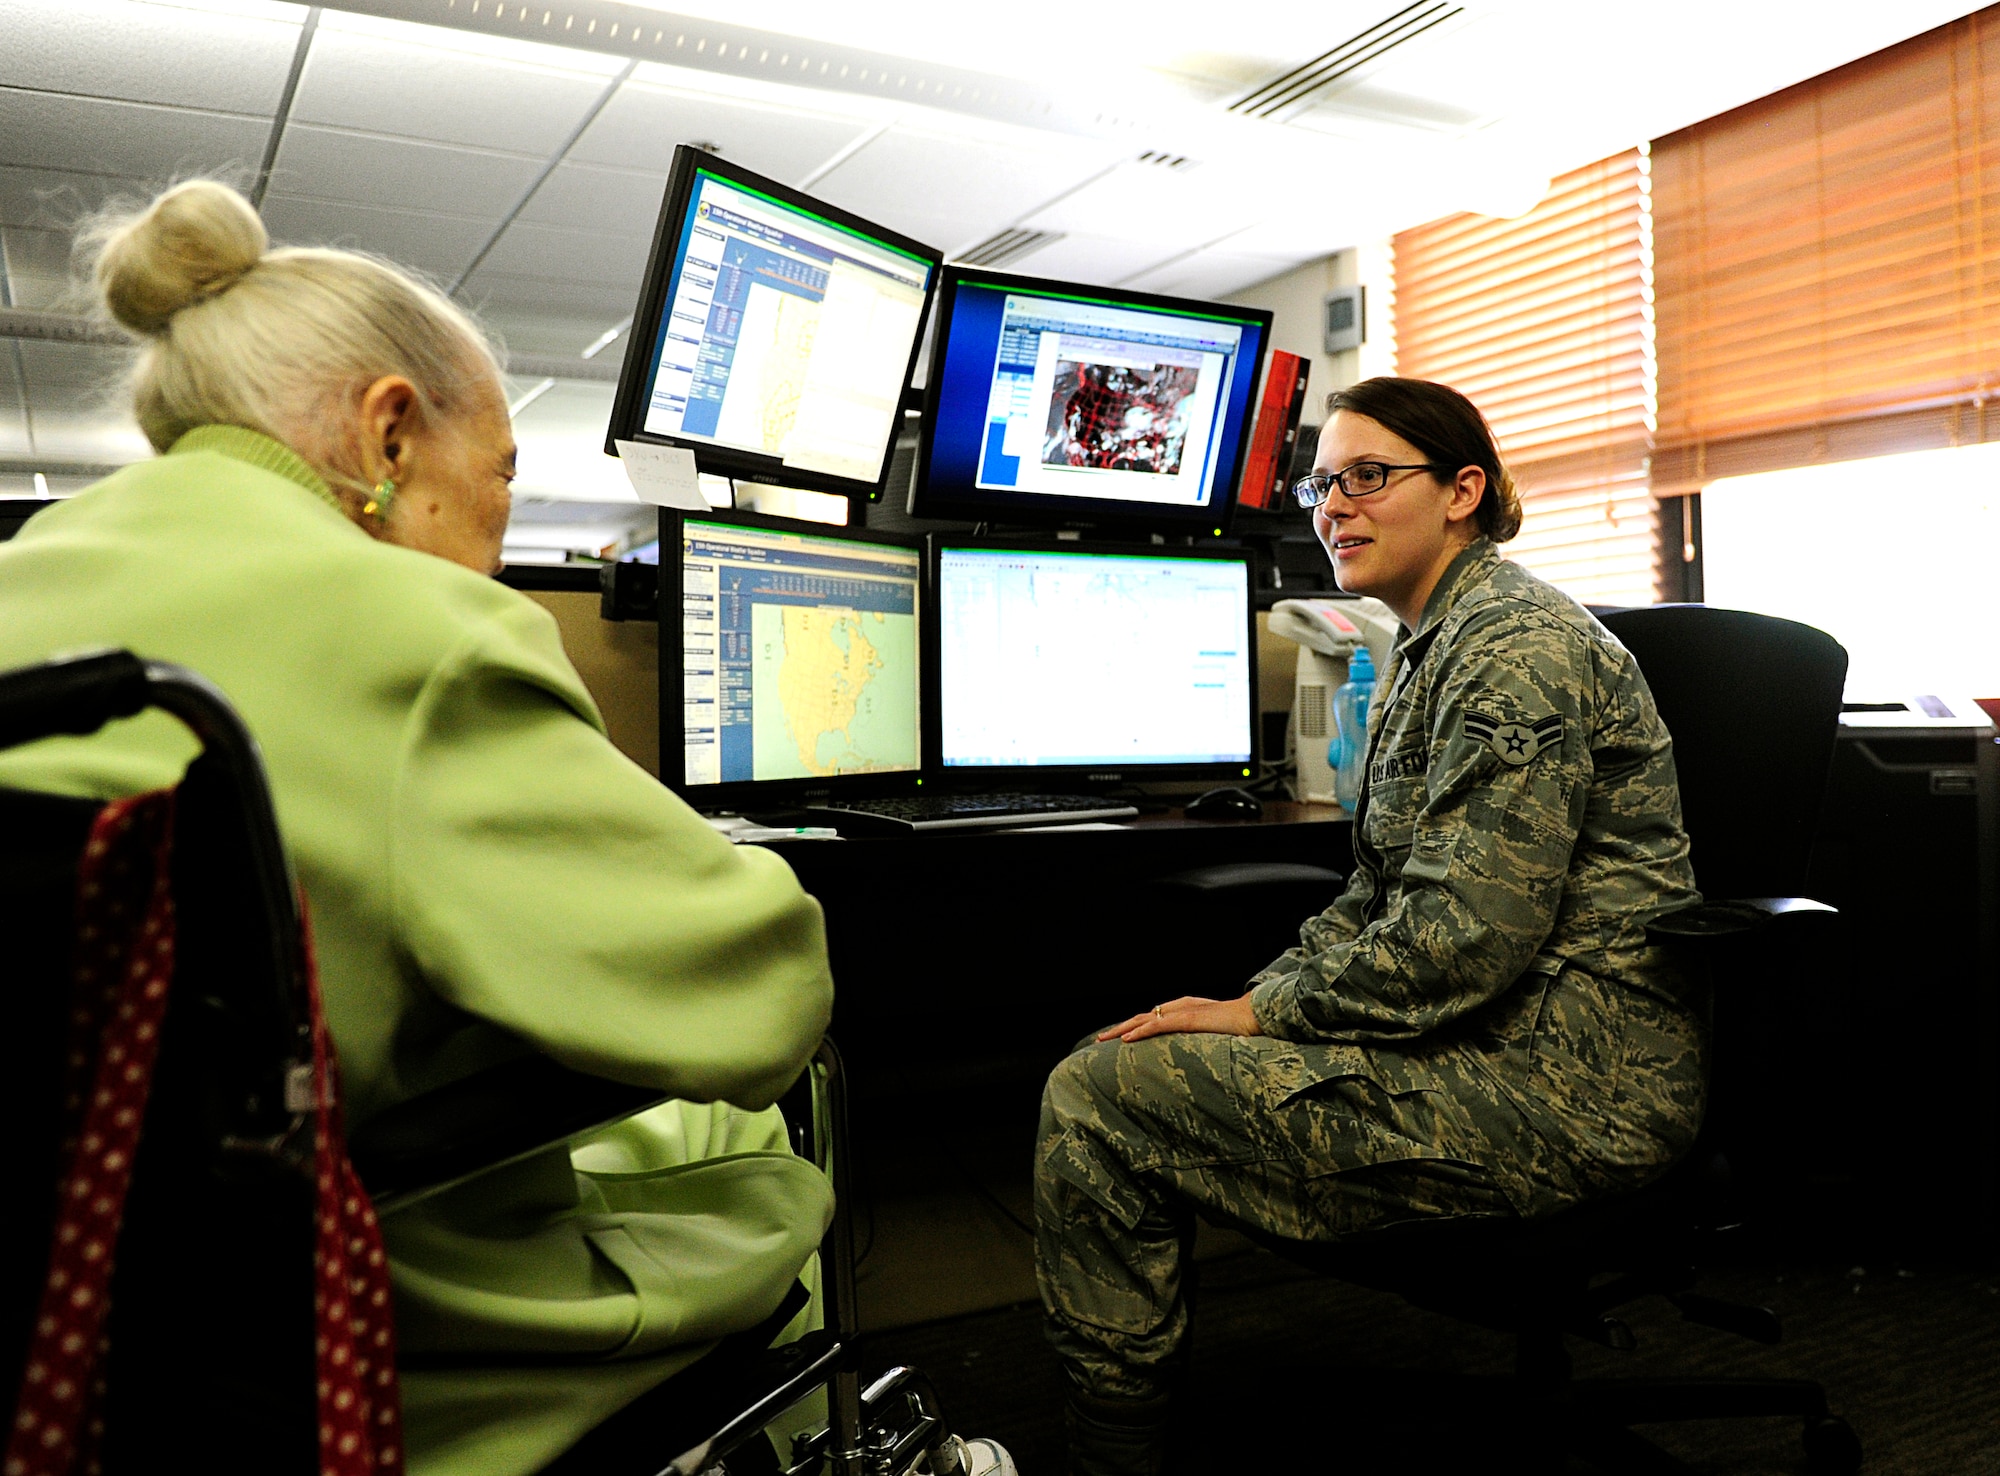 Airman 1st Class Emily Eason, 15th Operational Weather Squadron, shows Norma Cadena the tools a weather forecaster uses today at Scott Air Force Base, Ill., June 26, 2015. Cadena visited Scott with the help of Sisters of Saint Mary Health Hospice and Home Health Foundation “Memories that Last” program. She has terminal cancer and her last wish was to see what it would be like to be a weather forecaster today.  (U.S. Air Force photo/Staff Sgt. Stephenie Wade)